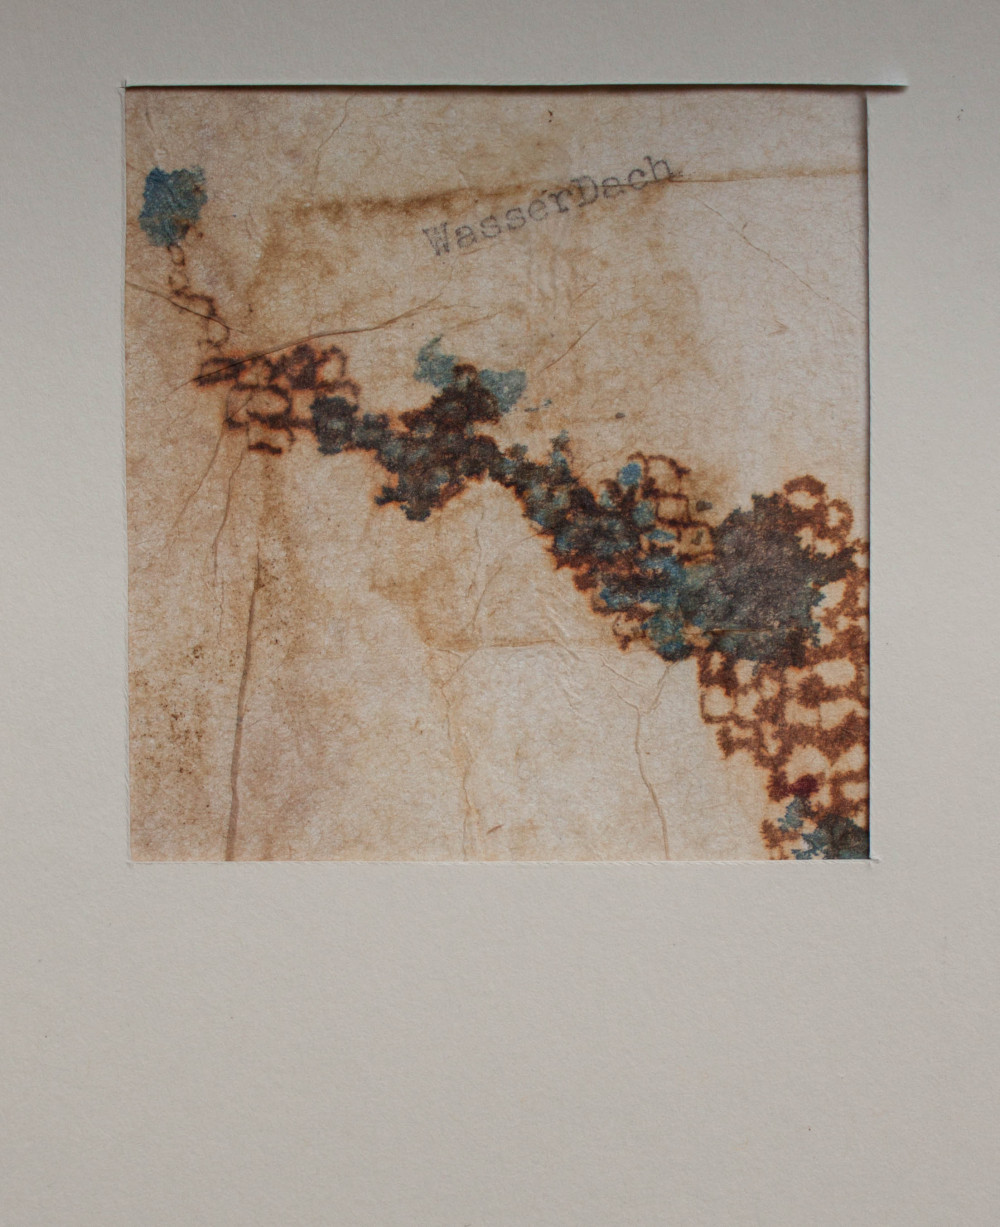 WasserDach | 2010 | watercolor and typewriter on used teabag